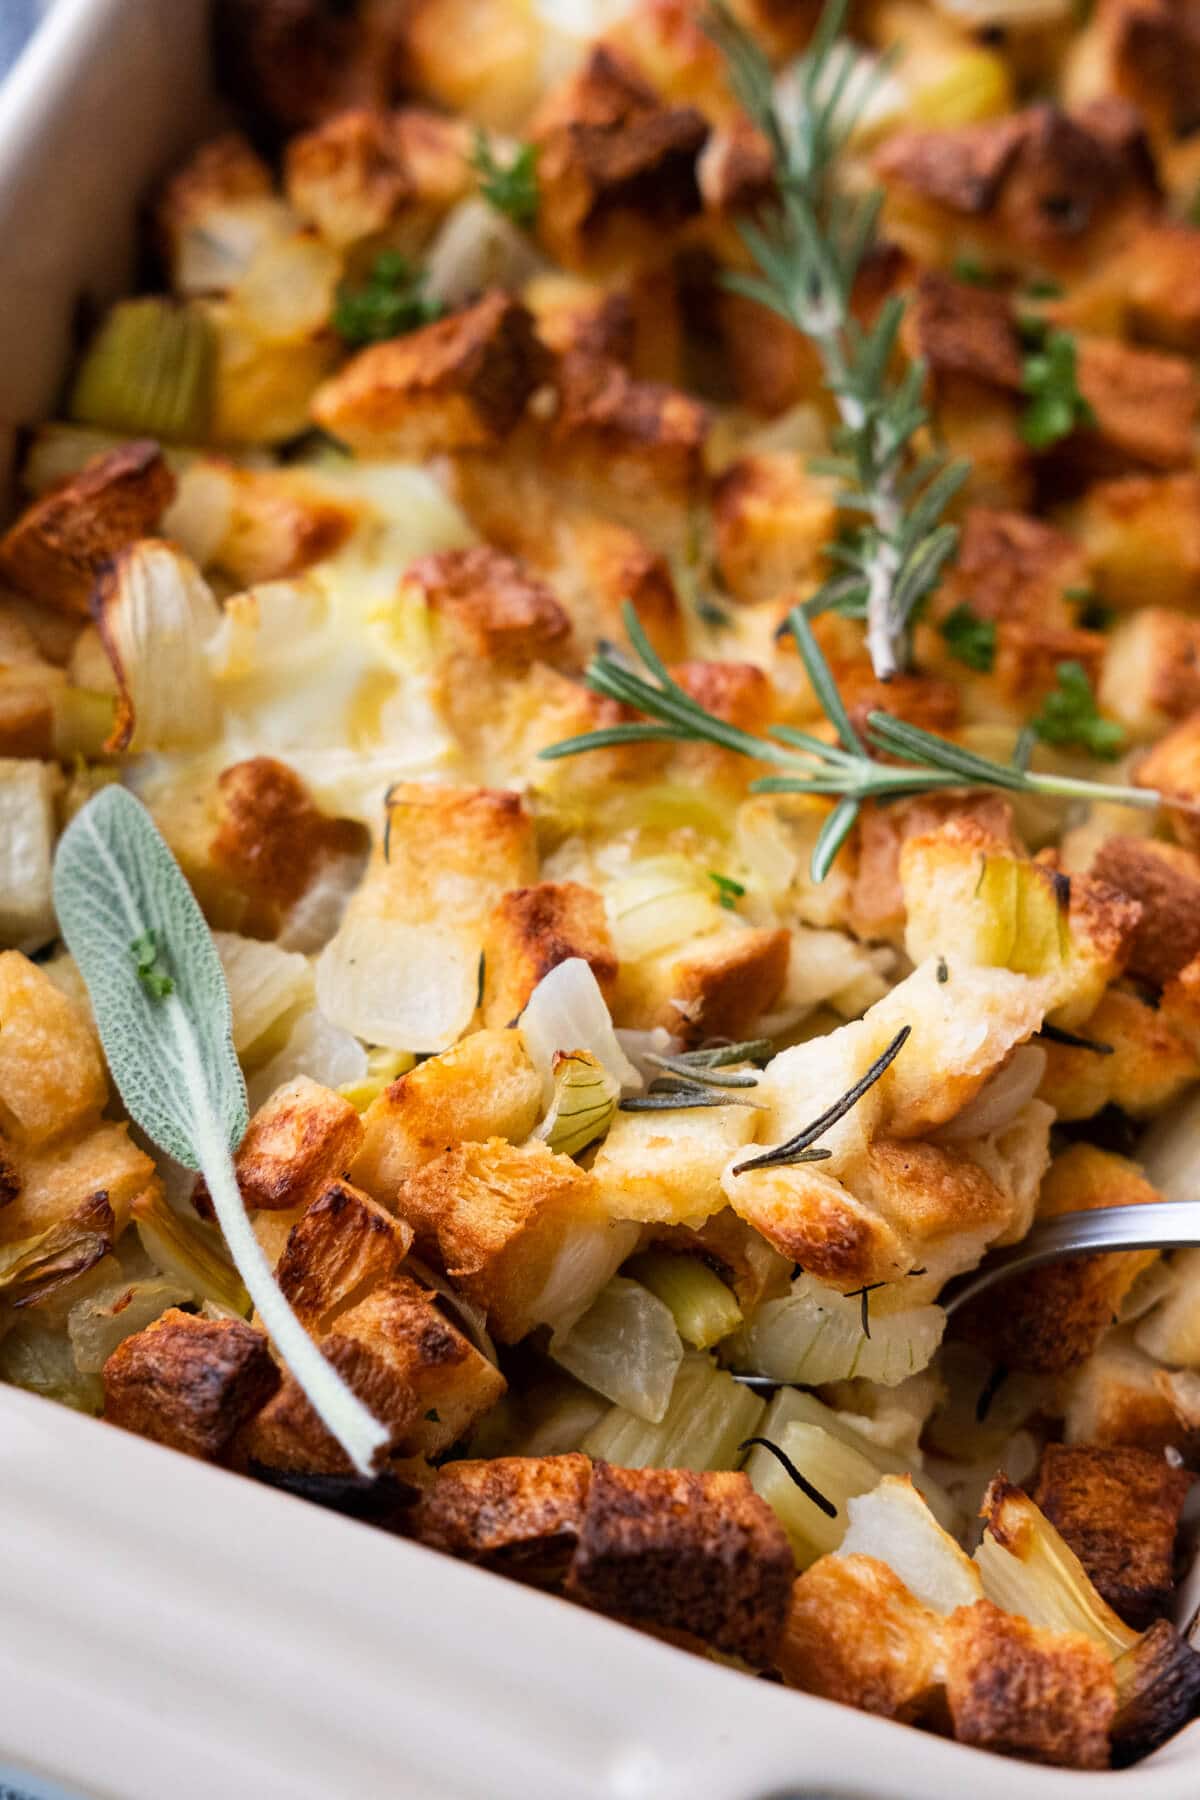 Delicious stuffing overloaded with herb aroma and topped with crisp bread.  